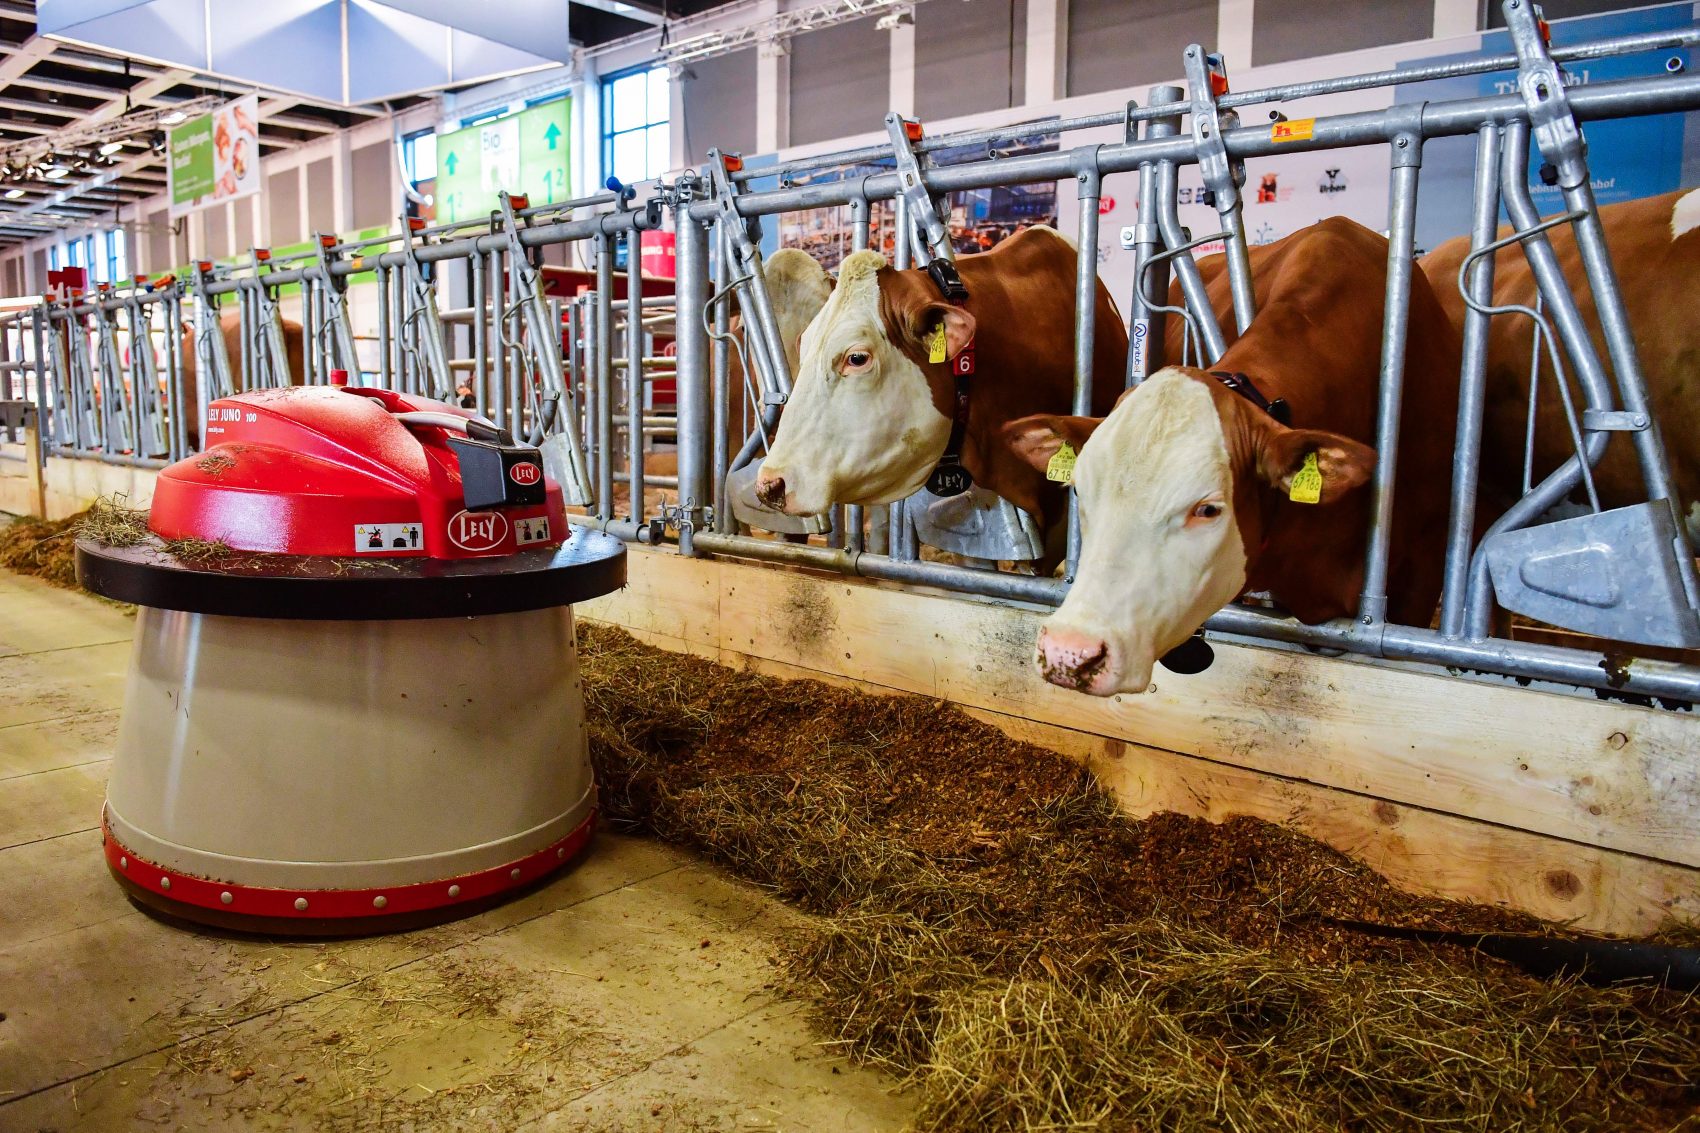 A robot automatically sweeps food toward two dairy cows at an &quot;automated farm&quot; exhibit at the International Green Week food and agriculture fair in Berlin on Jan. 19, 2017. (John MacDougall/AFP/Getty Images)